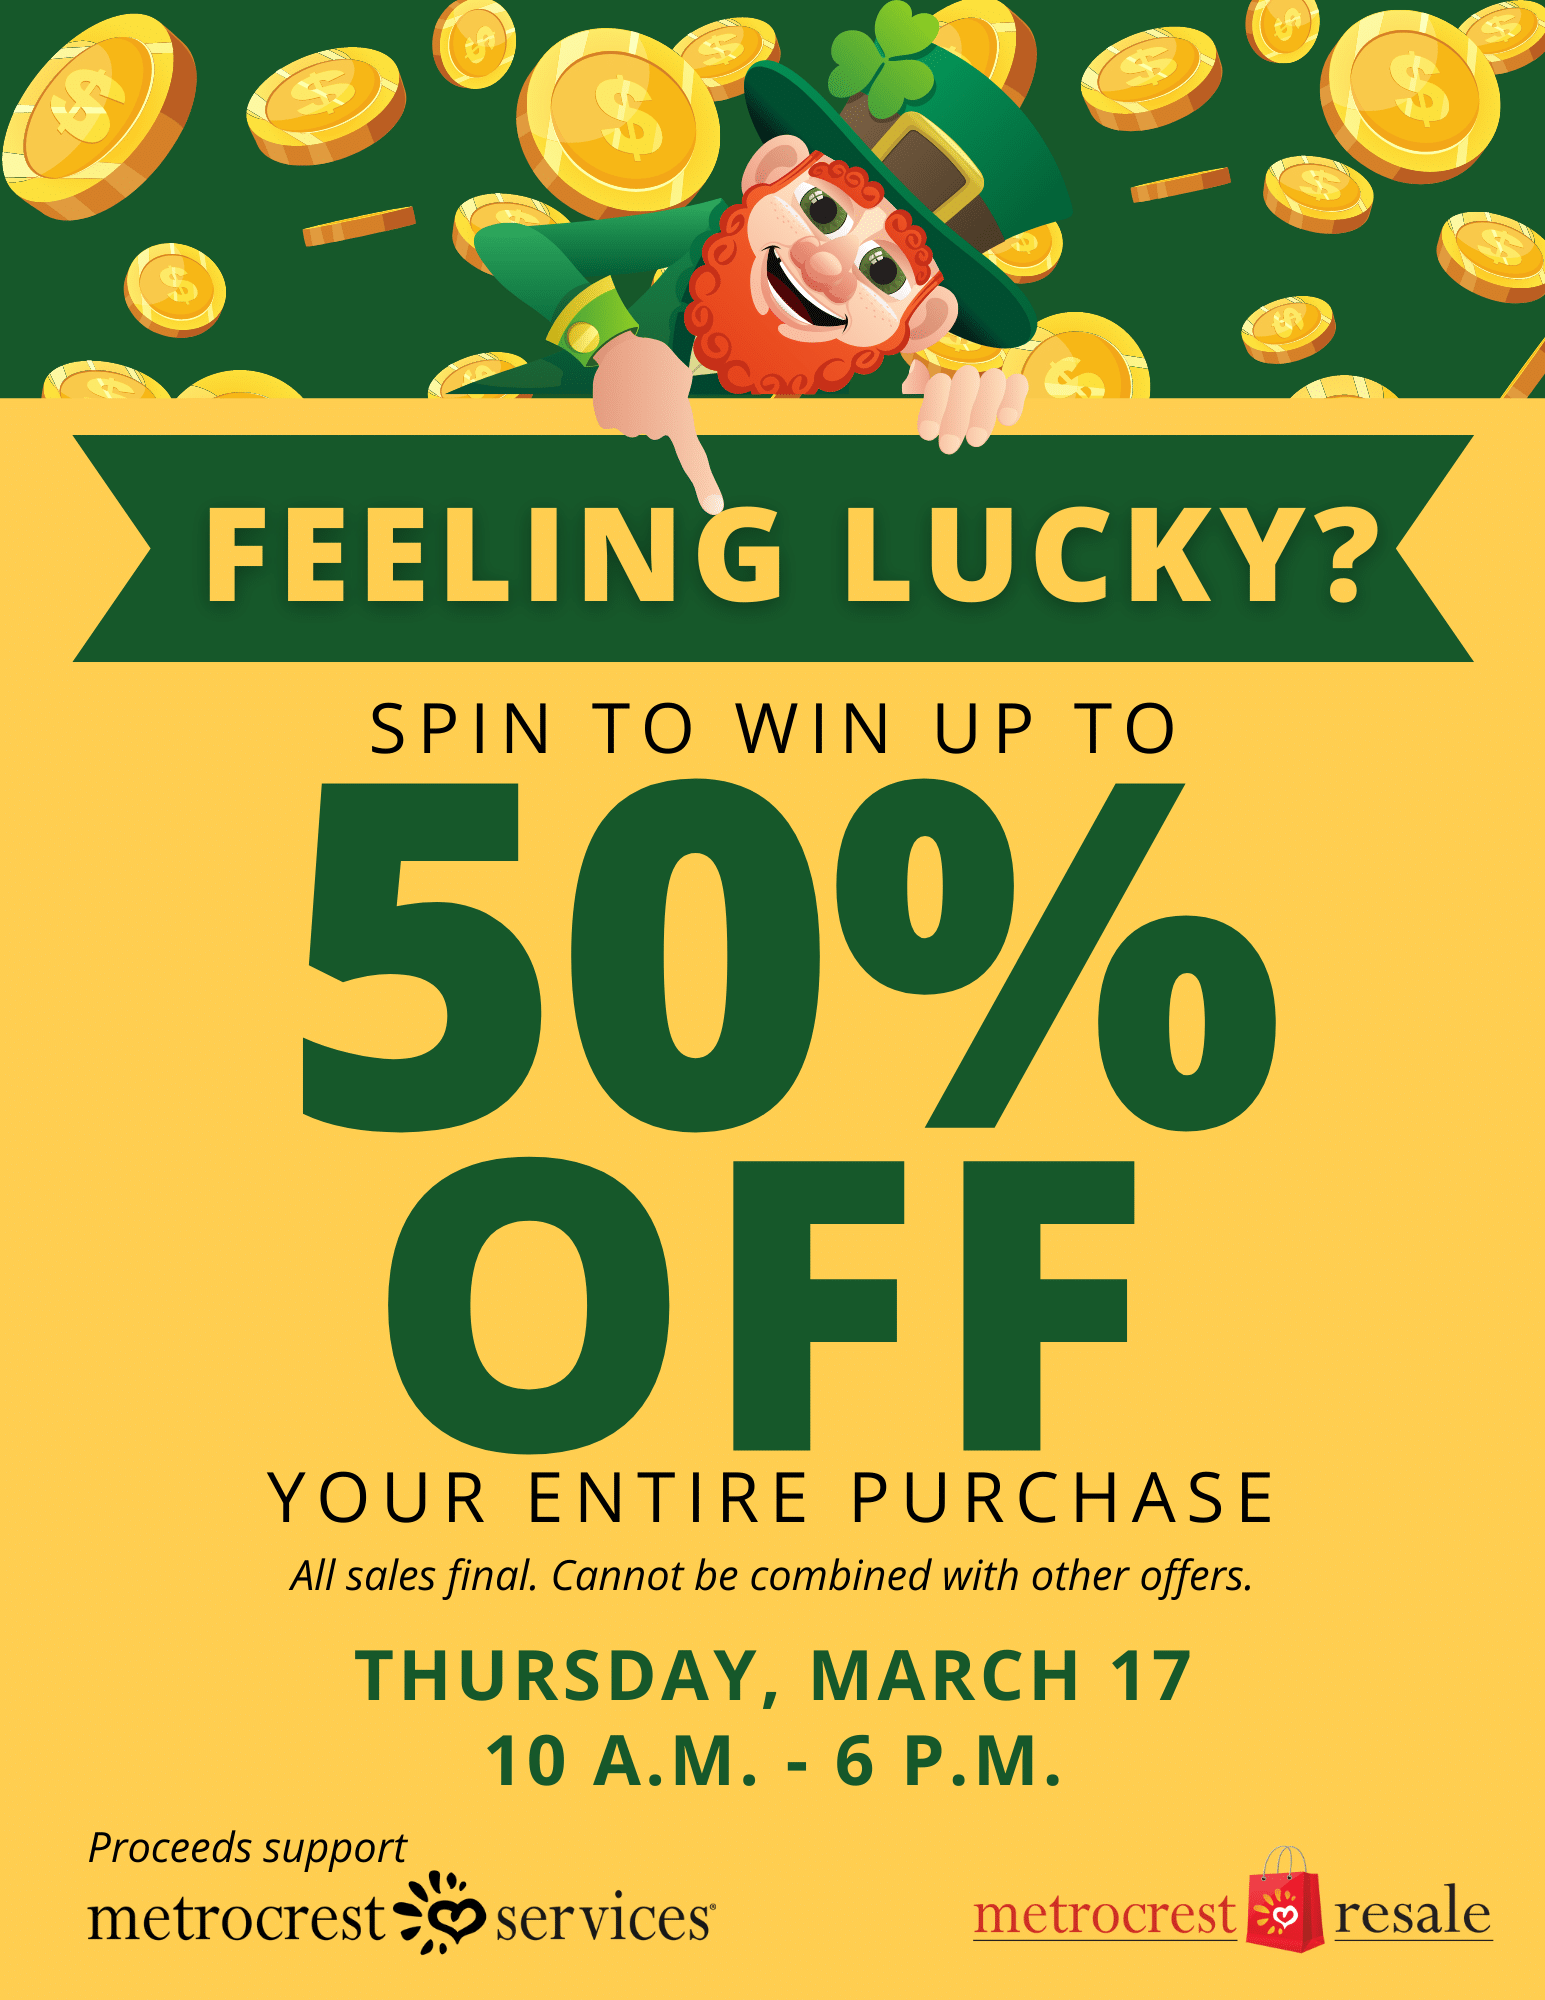 Spin to win up to 50% off your purchase at Metrocrest Resale on Thursday, March 17. 